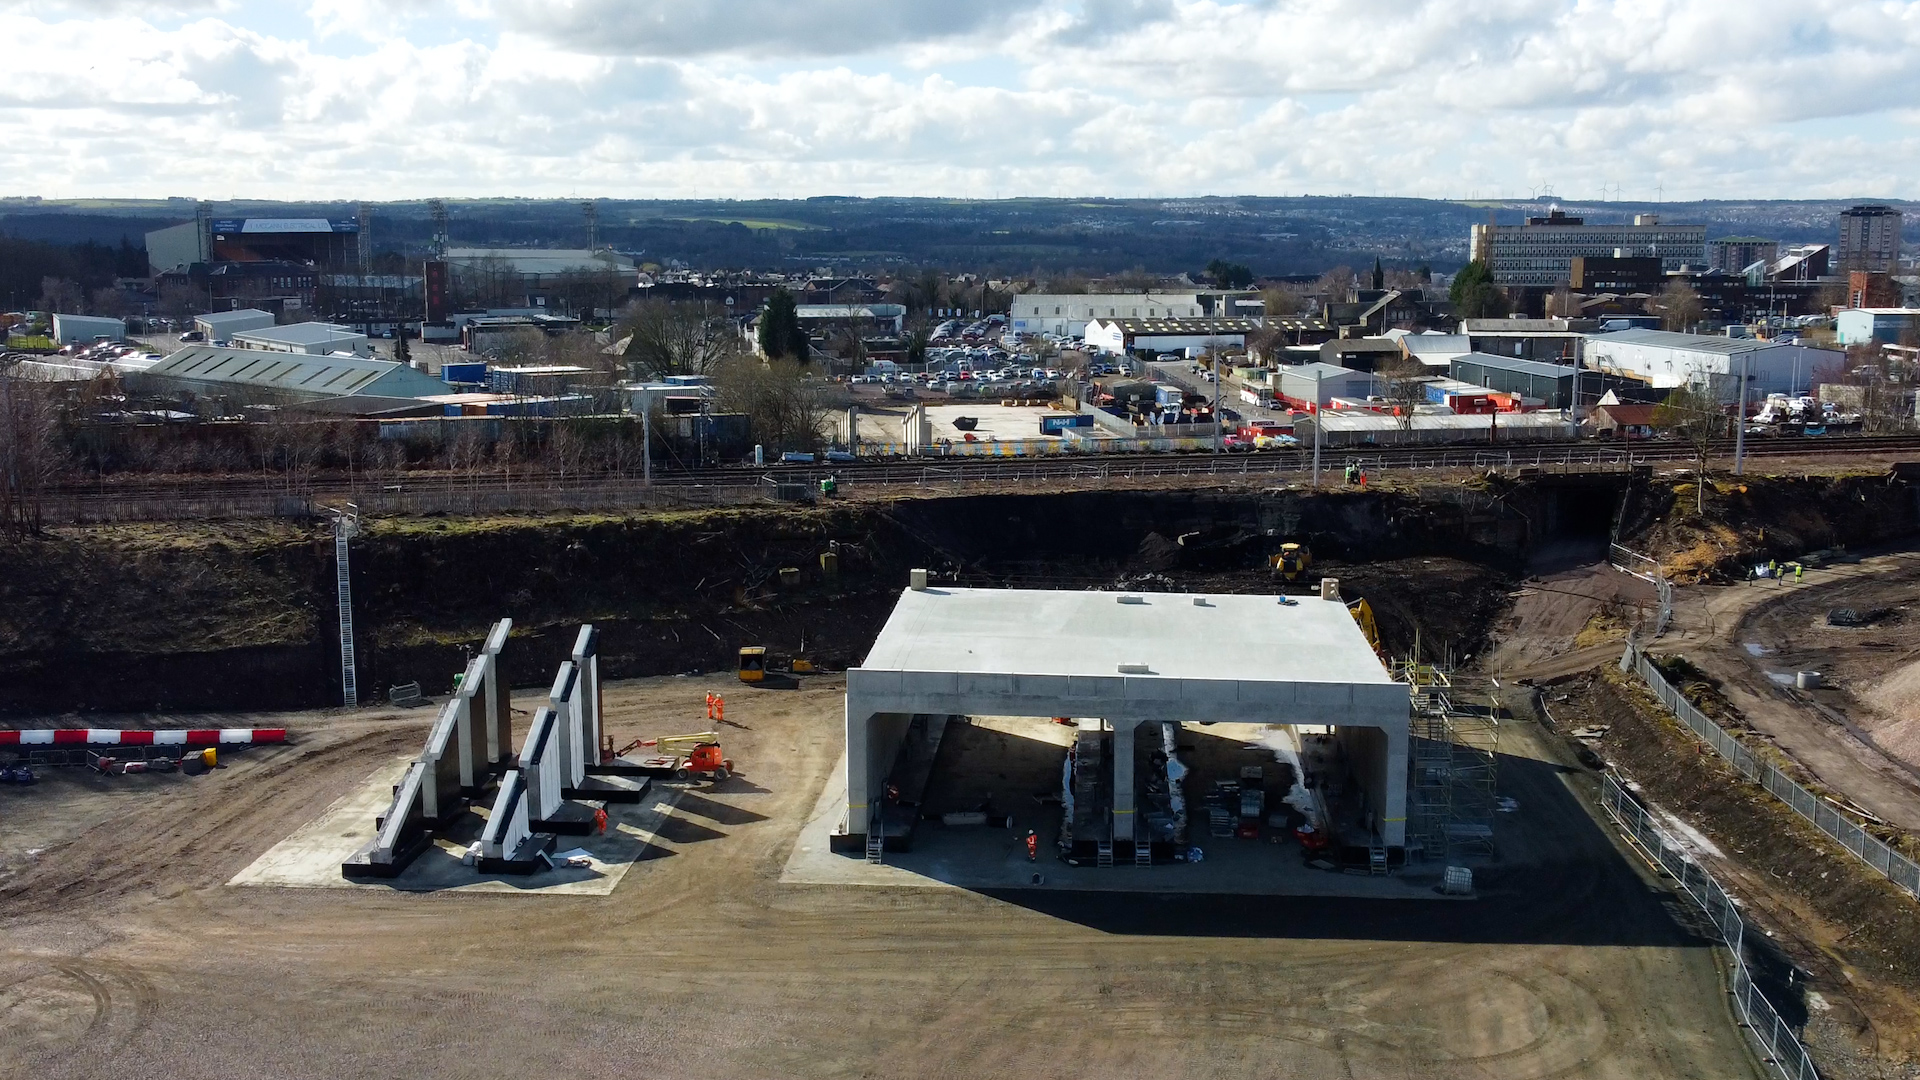 Ravenscraig gears up for one of largest bridge lifts in Europe